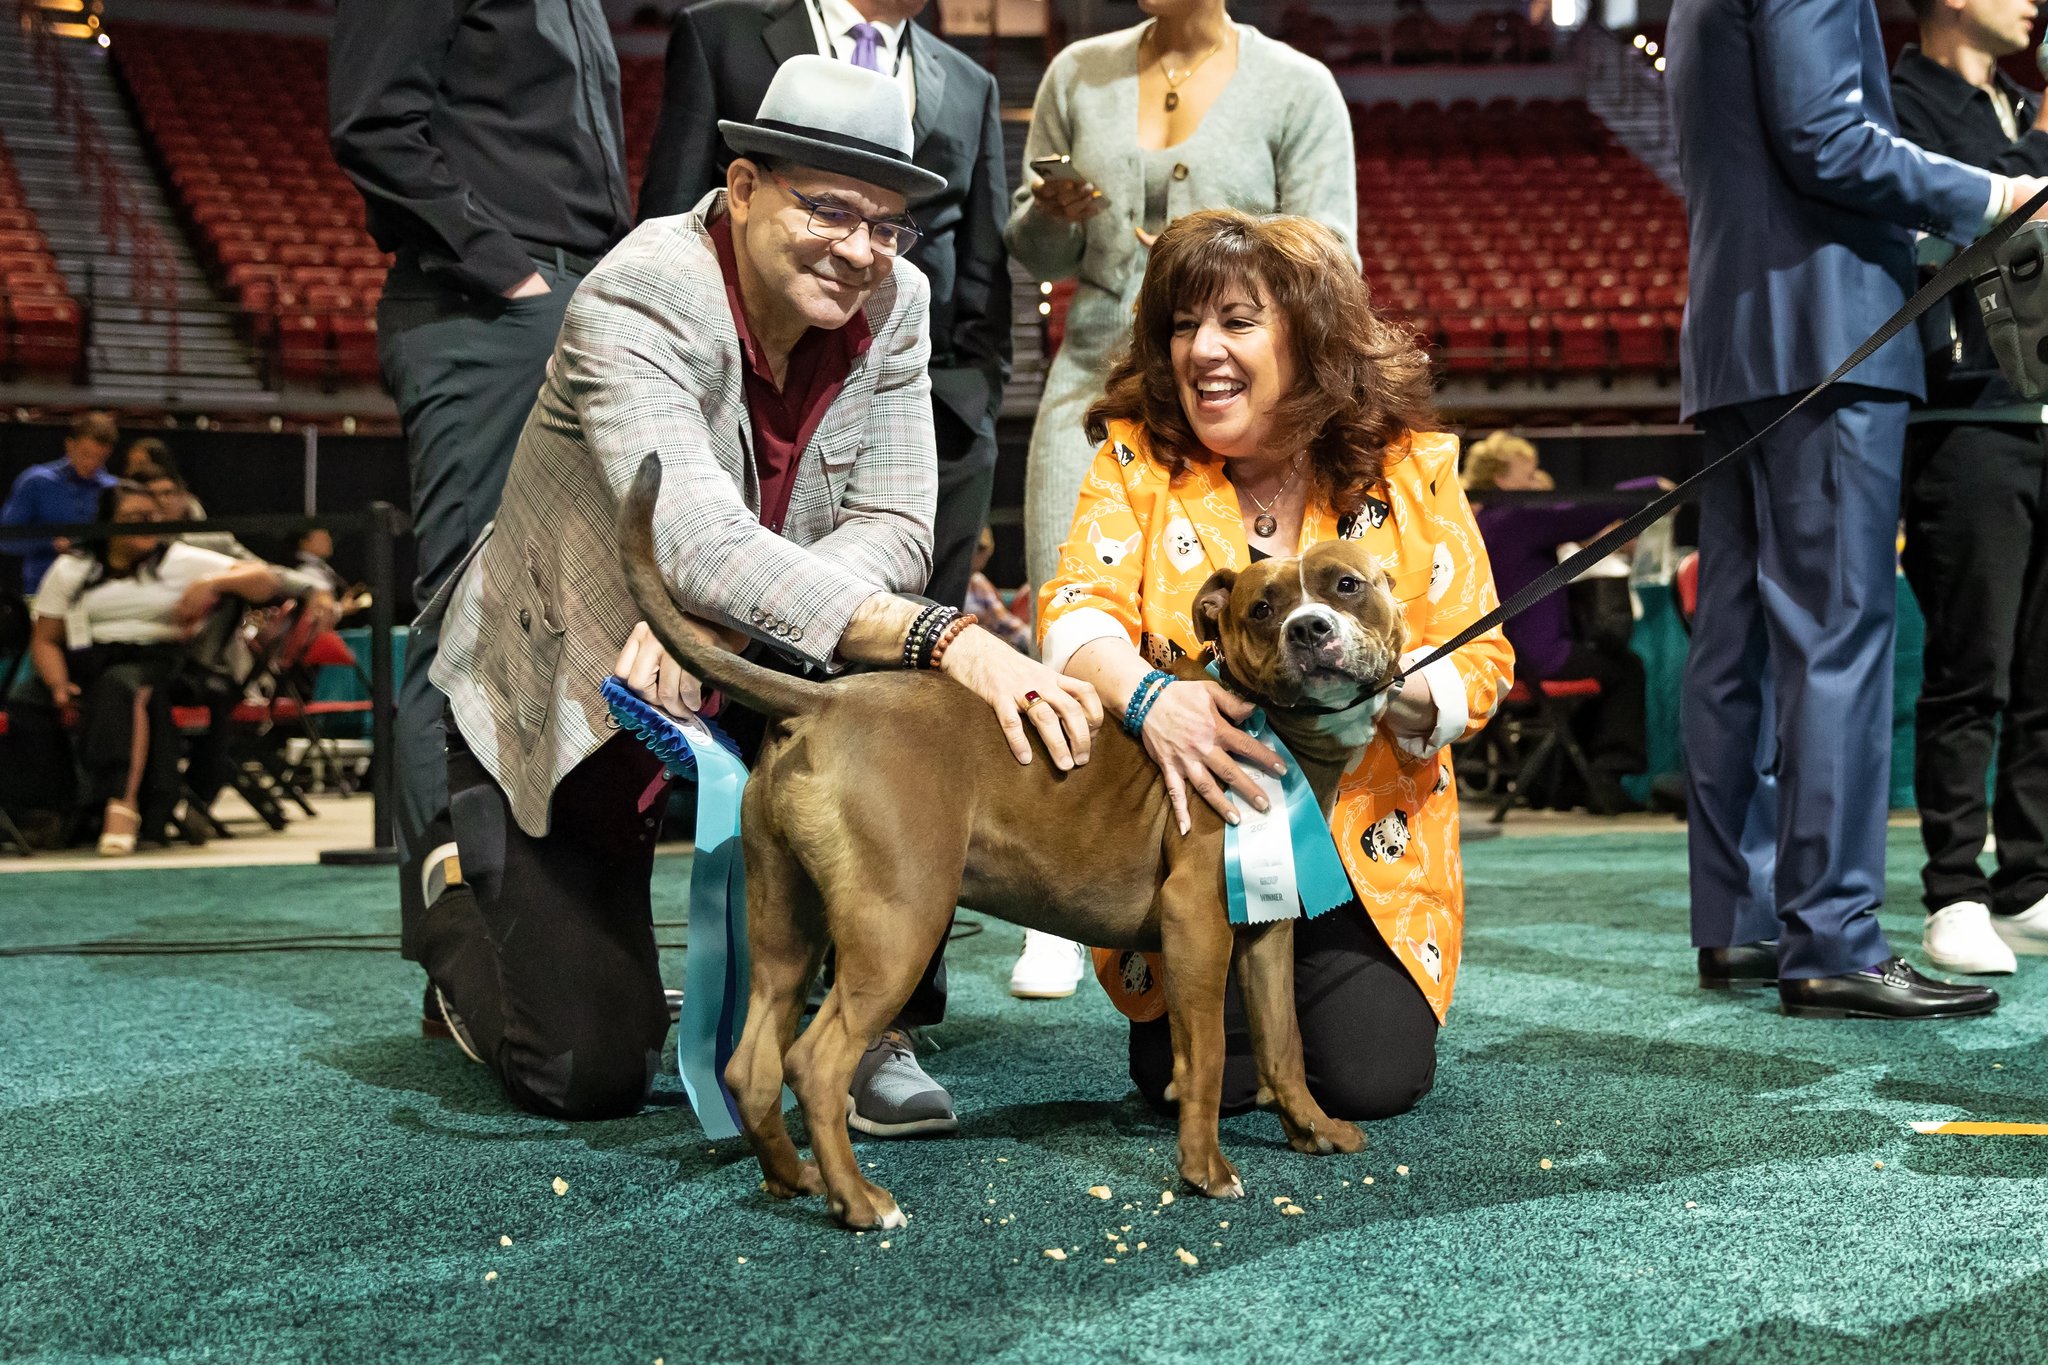 Local pit bull, Mr. Worldwide, wins Best in Show at Animal Foundation fundraiser